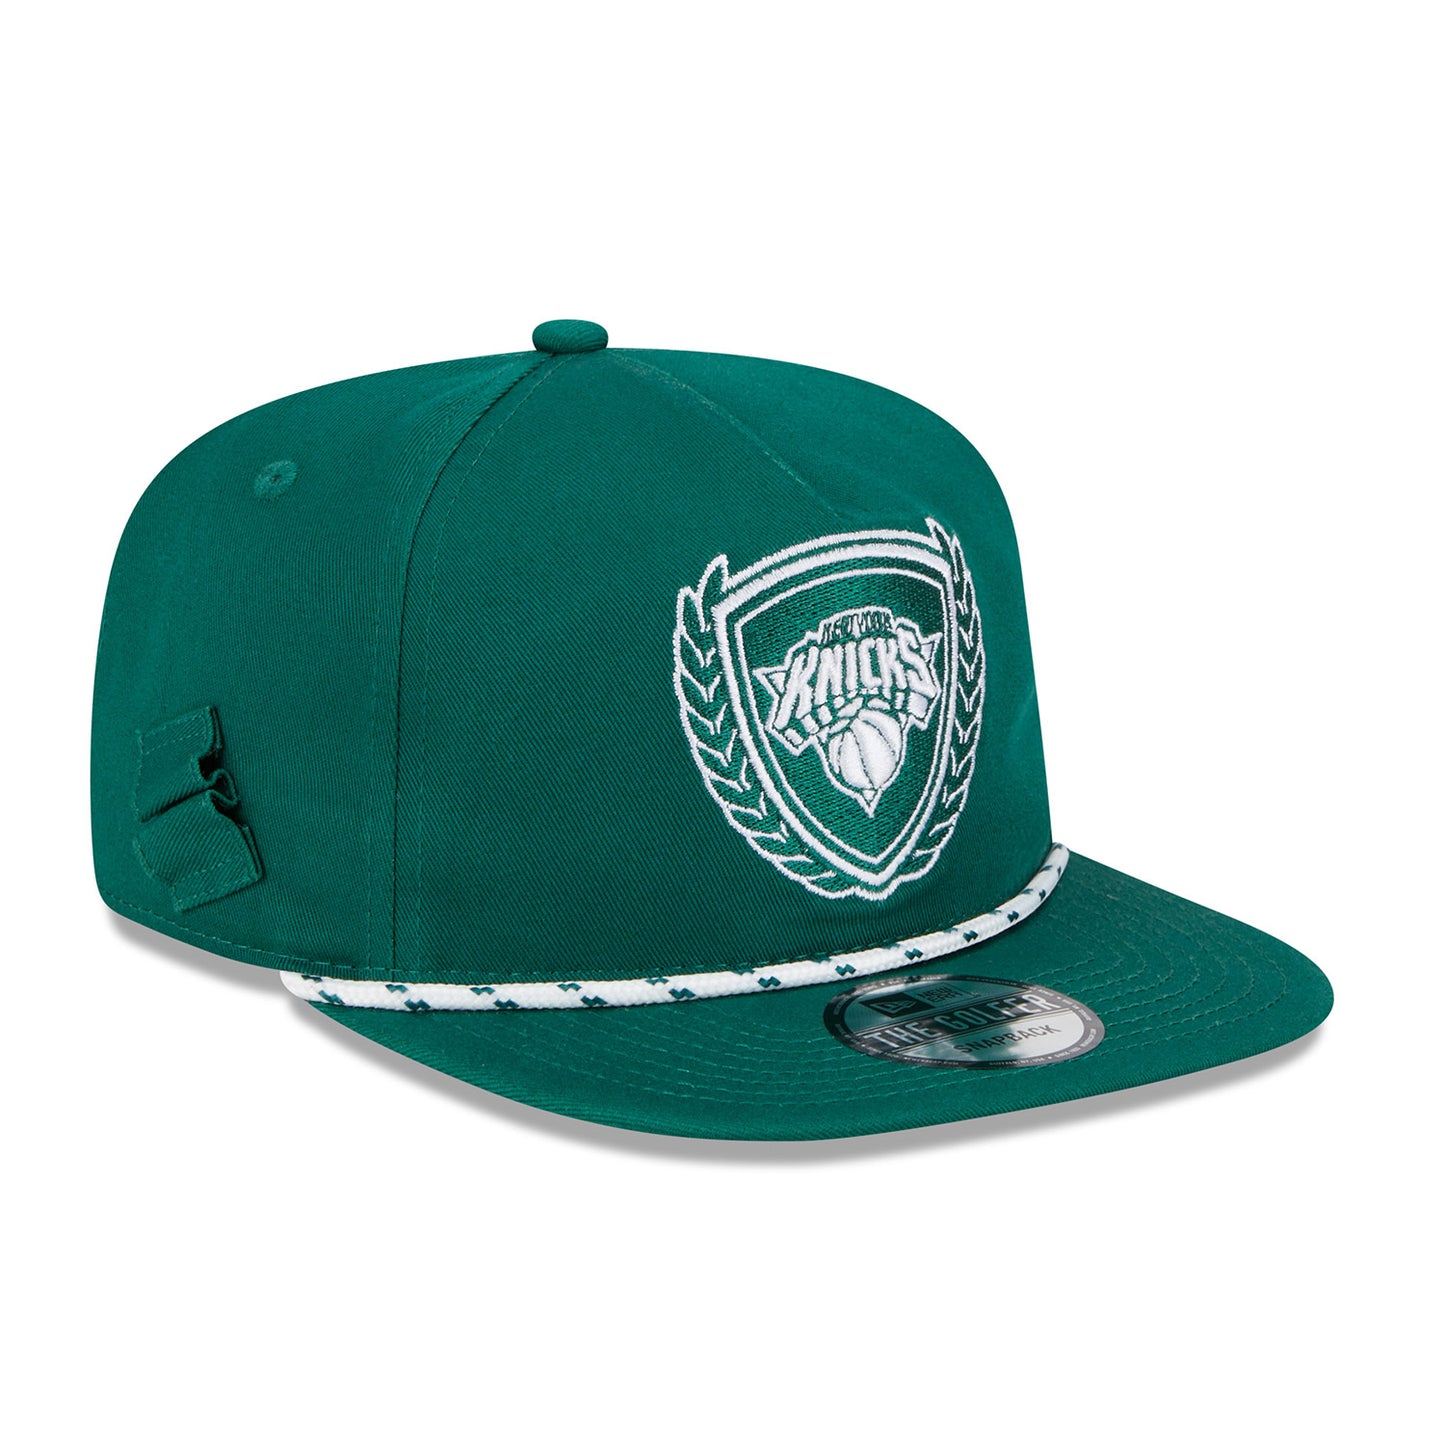 New Era Knicks Golfer Emerald Green Leaves Snapback Hat - Angled Right Side View